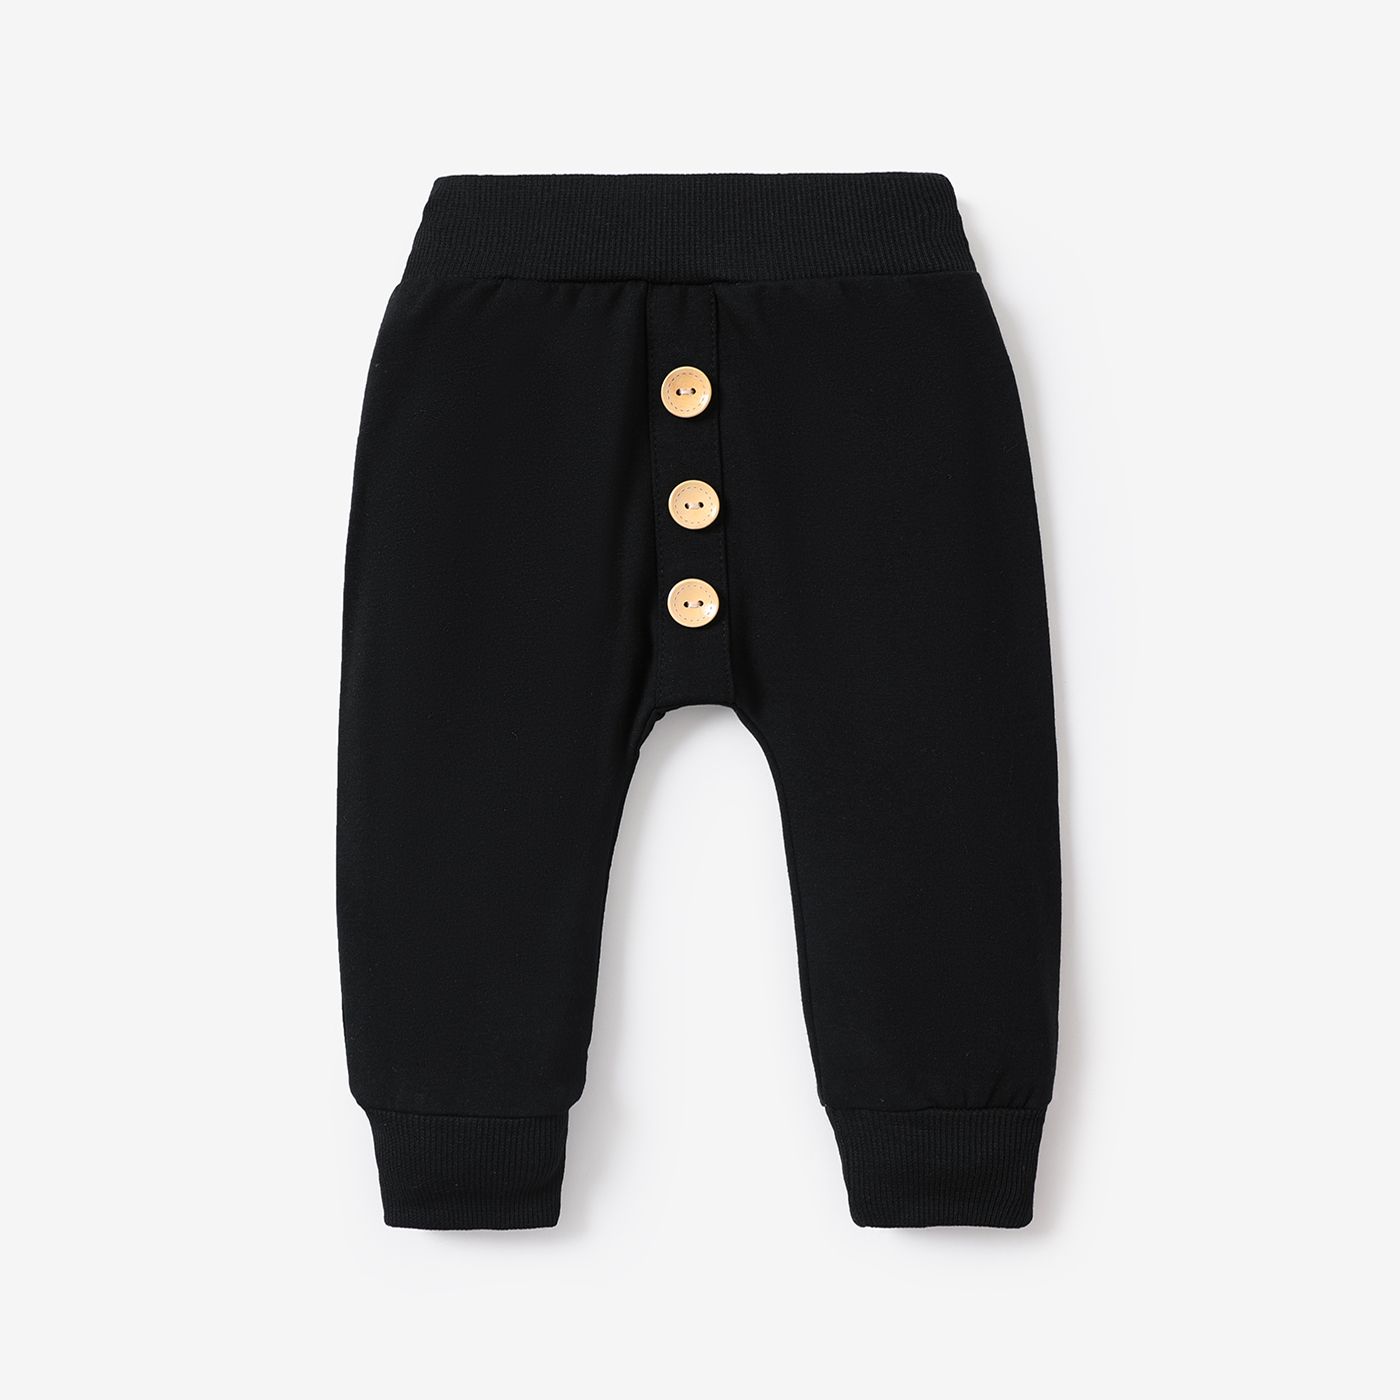 Baby Boy/Girl Button Front Solid Sweatpants